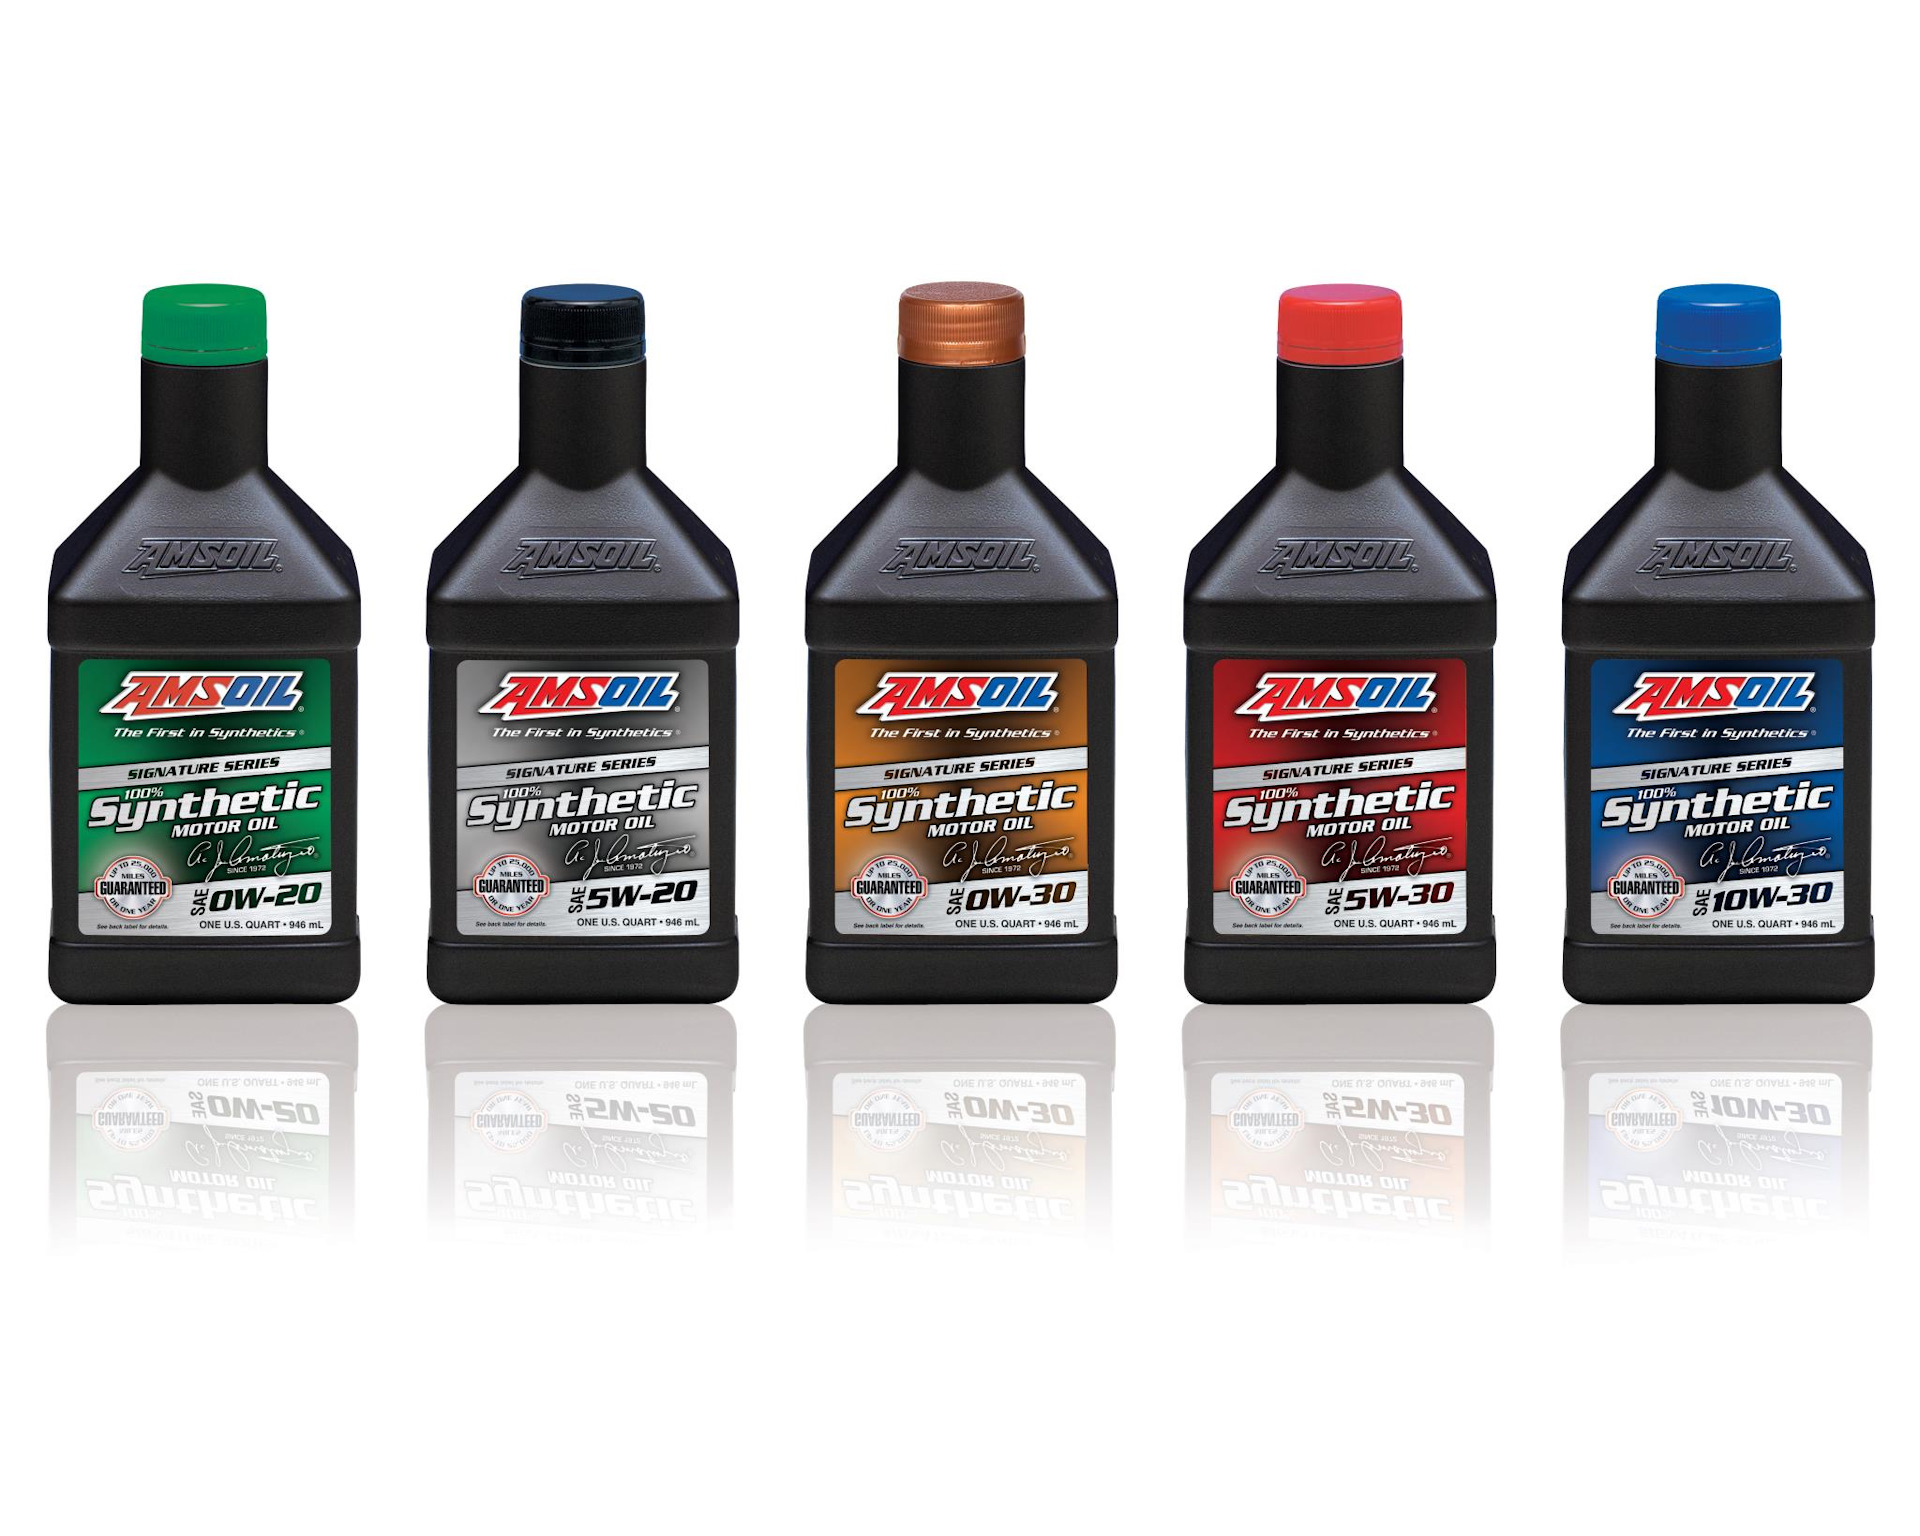 Amsoil signature series synthetic. АМСОИЛ сигнатуре. AMSOIL Signature Series Synthetic Motor Oil 5w-30. Масло Premium. AMSOIL обкаточное масло.